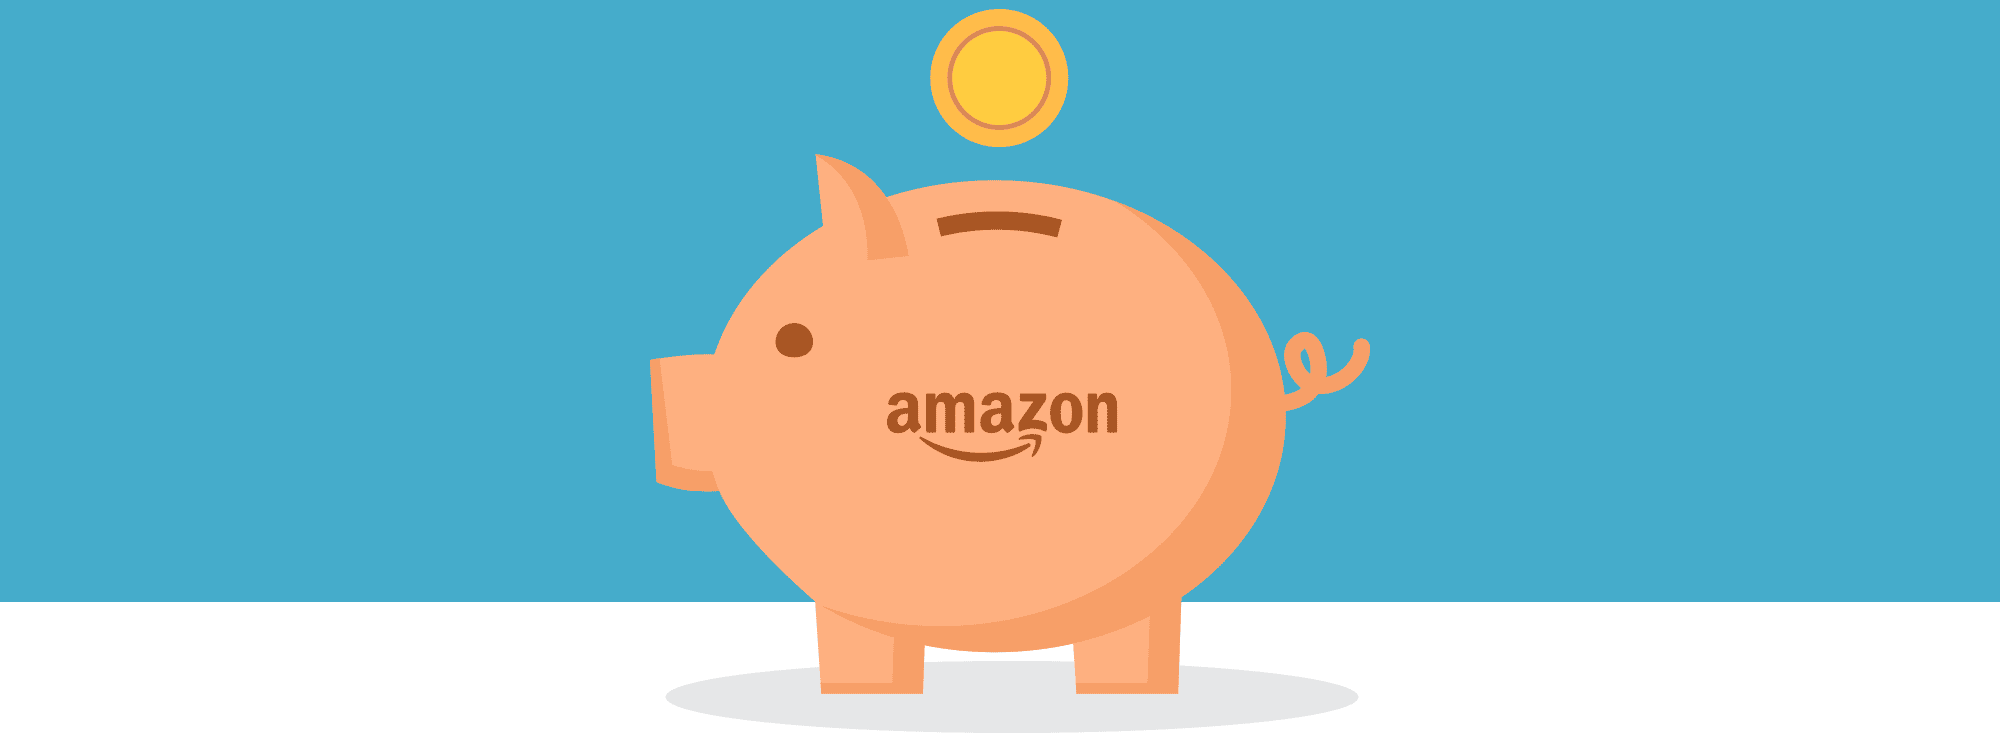 Amazon FBA Fees in 2020 Are Going Up A LOT